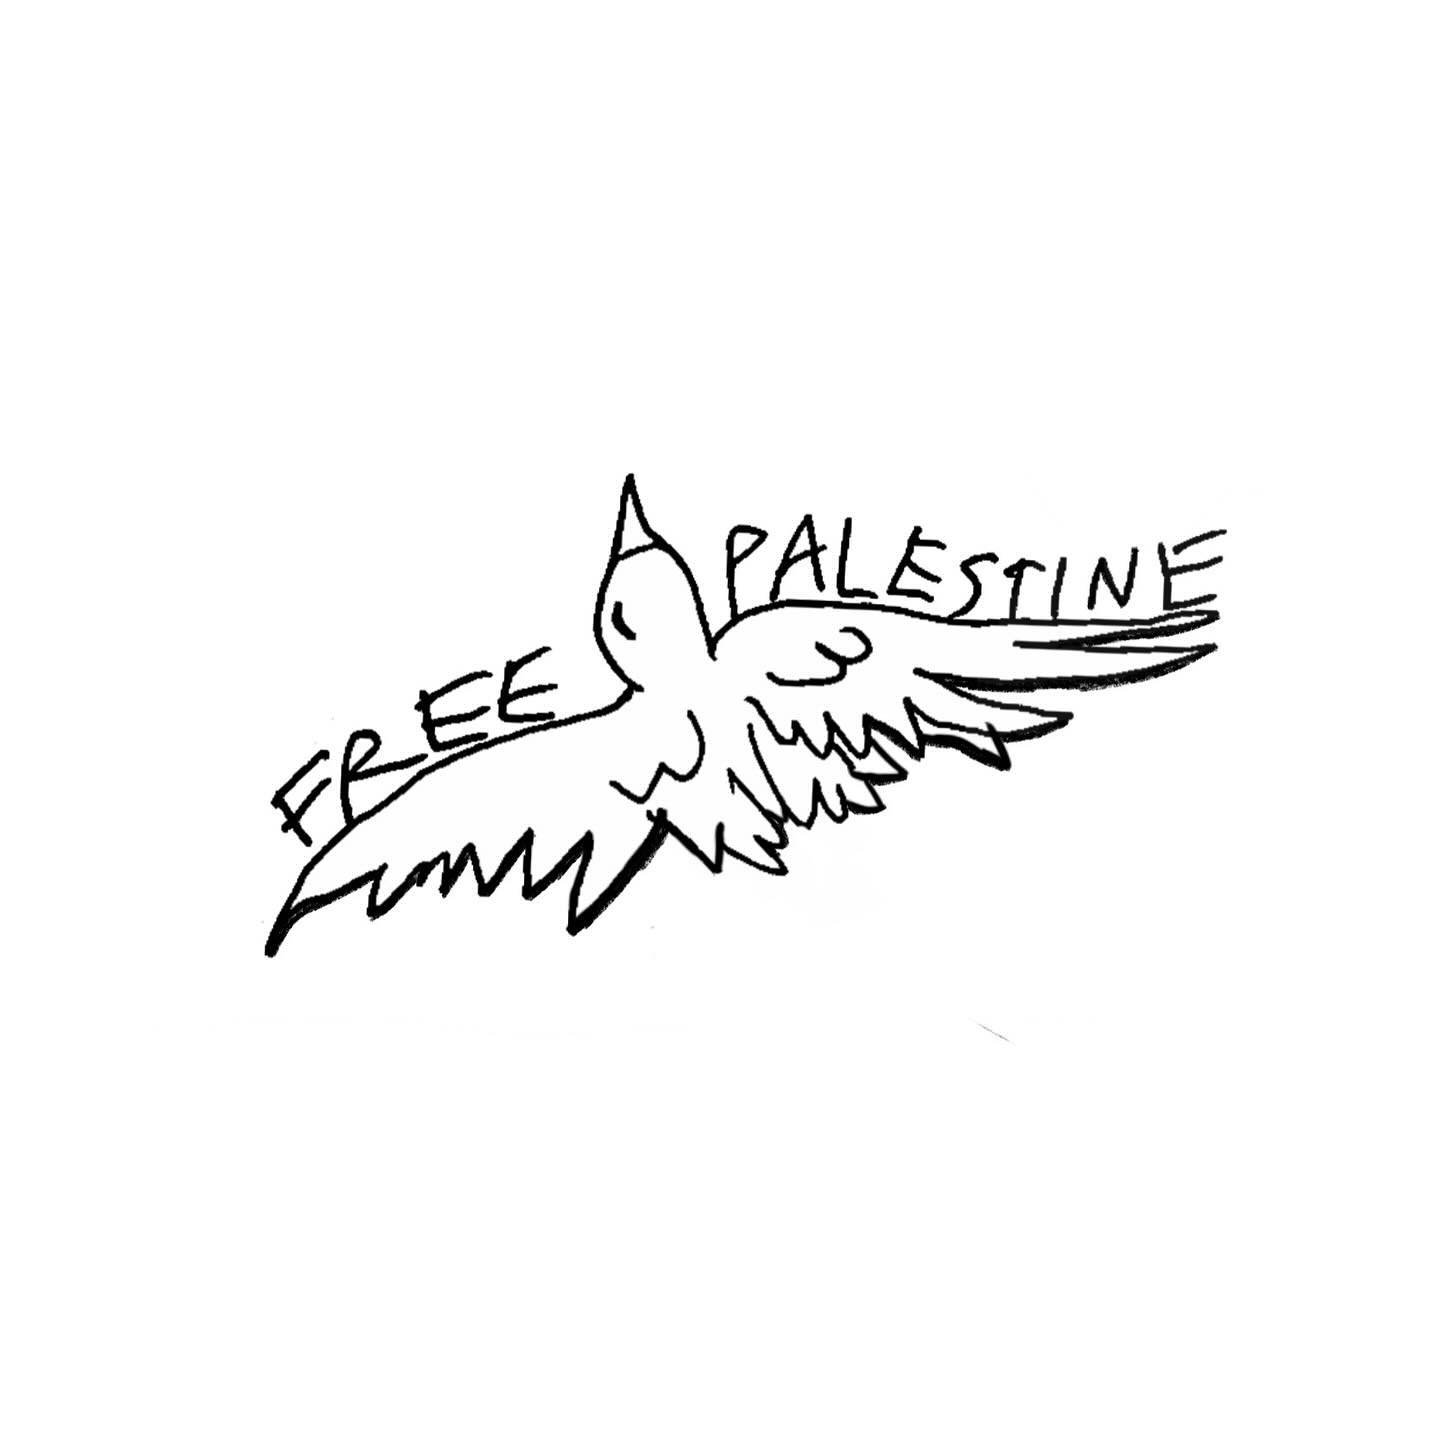 🇵🇸🇵🇸FREE PALESTINE FLASH 🇵🇸🇵🇸

I am participating in @hibrfalastin #tattoosforpalestine All designs start at $30 and after covering the cost of some supplies, all funds raised will go directly to Palestinian civilians in need. 

We can work o